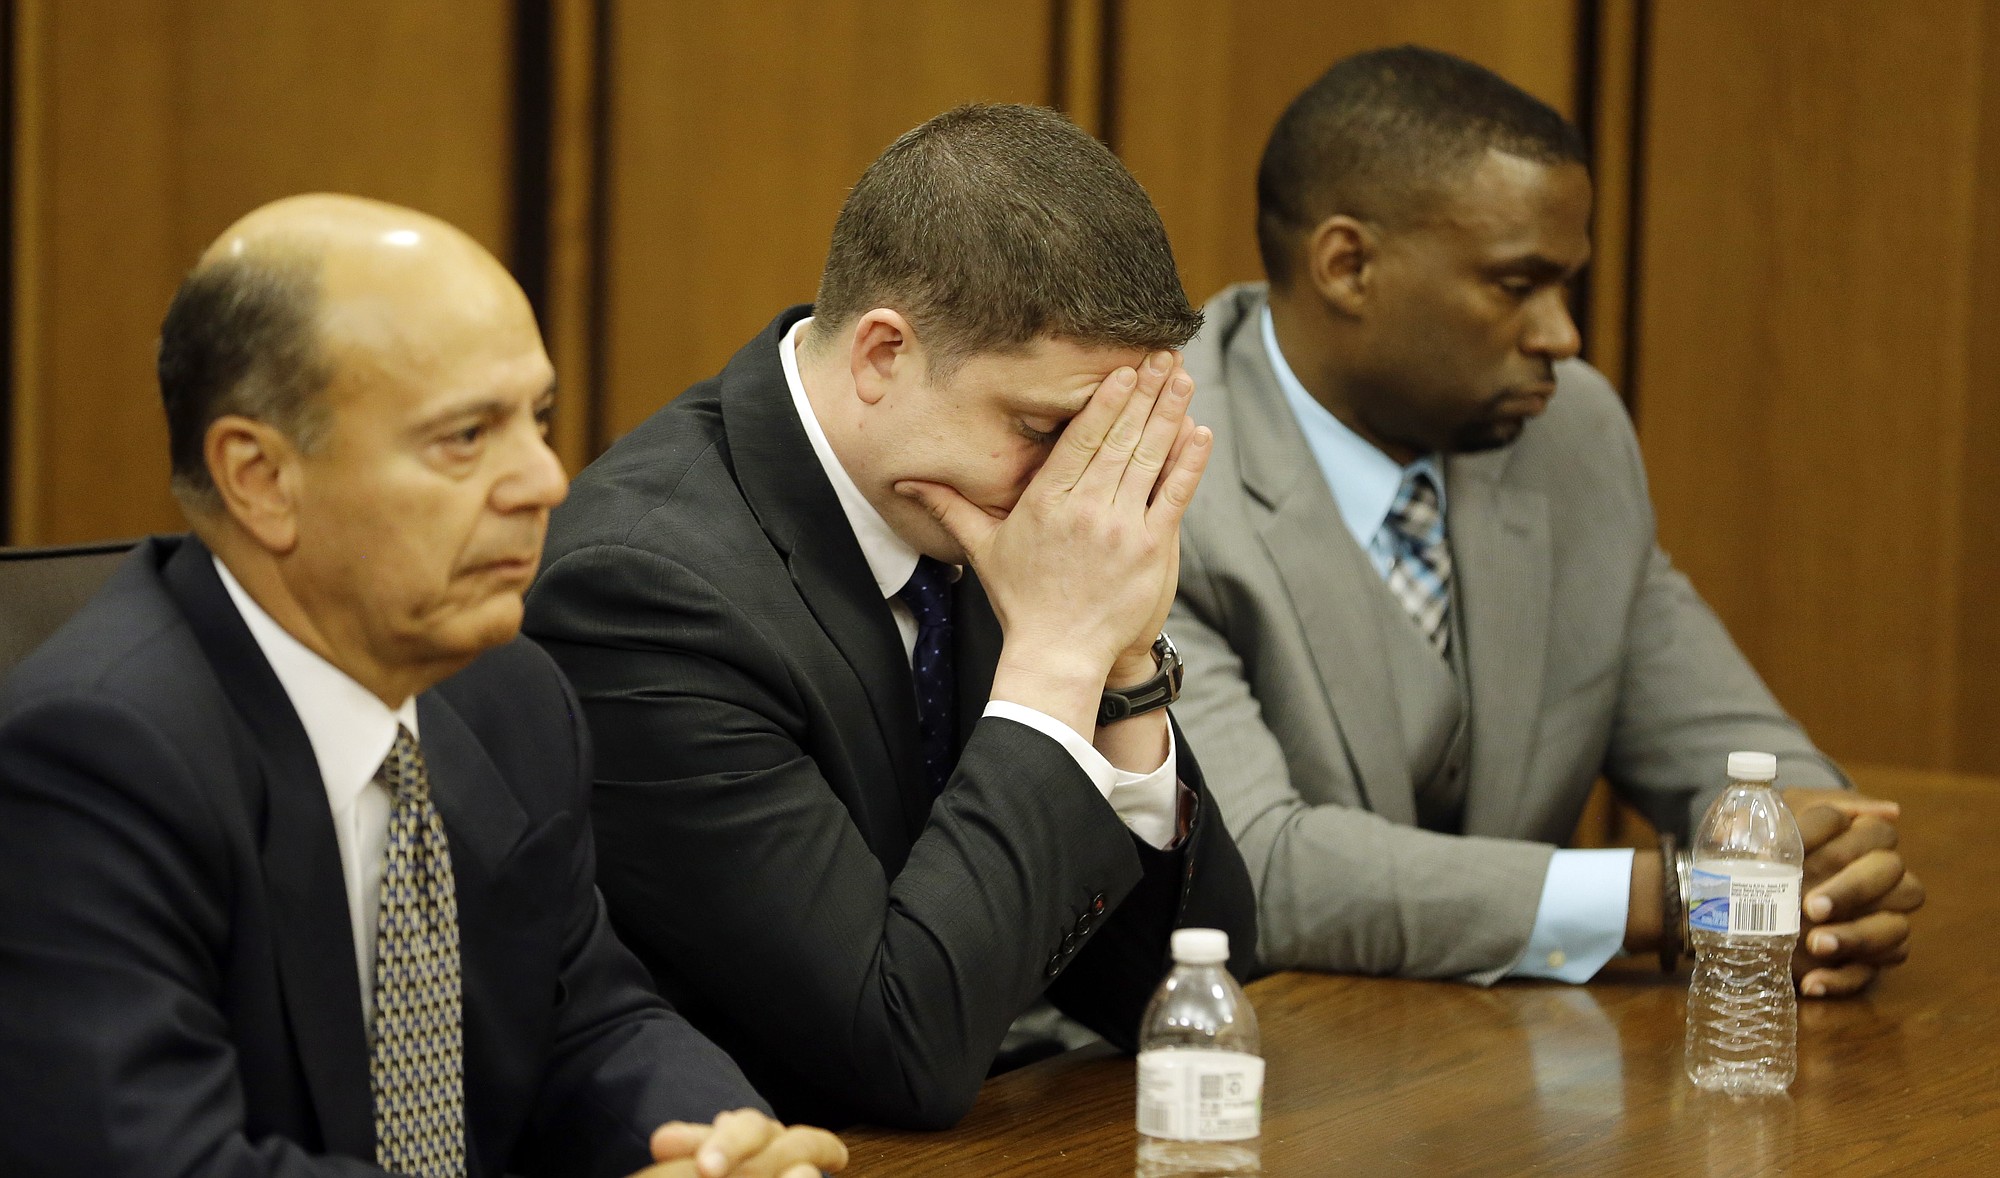 Michael Brelo, center, reacts after the verdict in his trial Saturday in Cleveland. Brelo, a patrolman charged in the shooting deaths of two unarmed suspects during a 137-shot barrage of gunfire was acquitted Saturday in a case that helped prompt the U.S. Department of Justice determine the city police department had a history of using excessive force and violating civil rights.